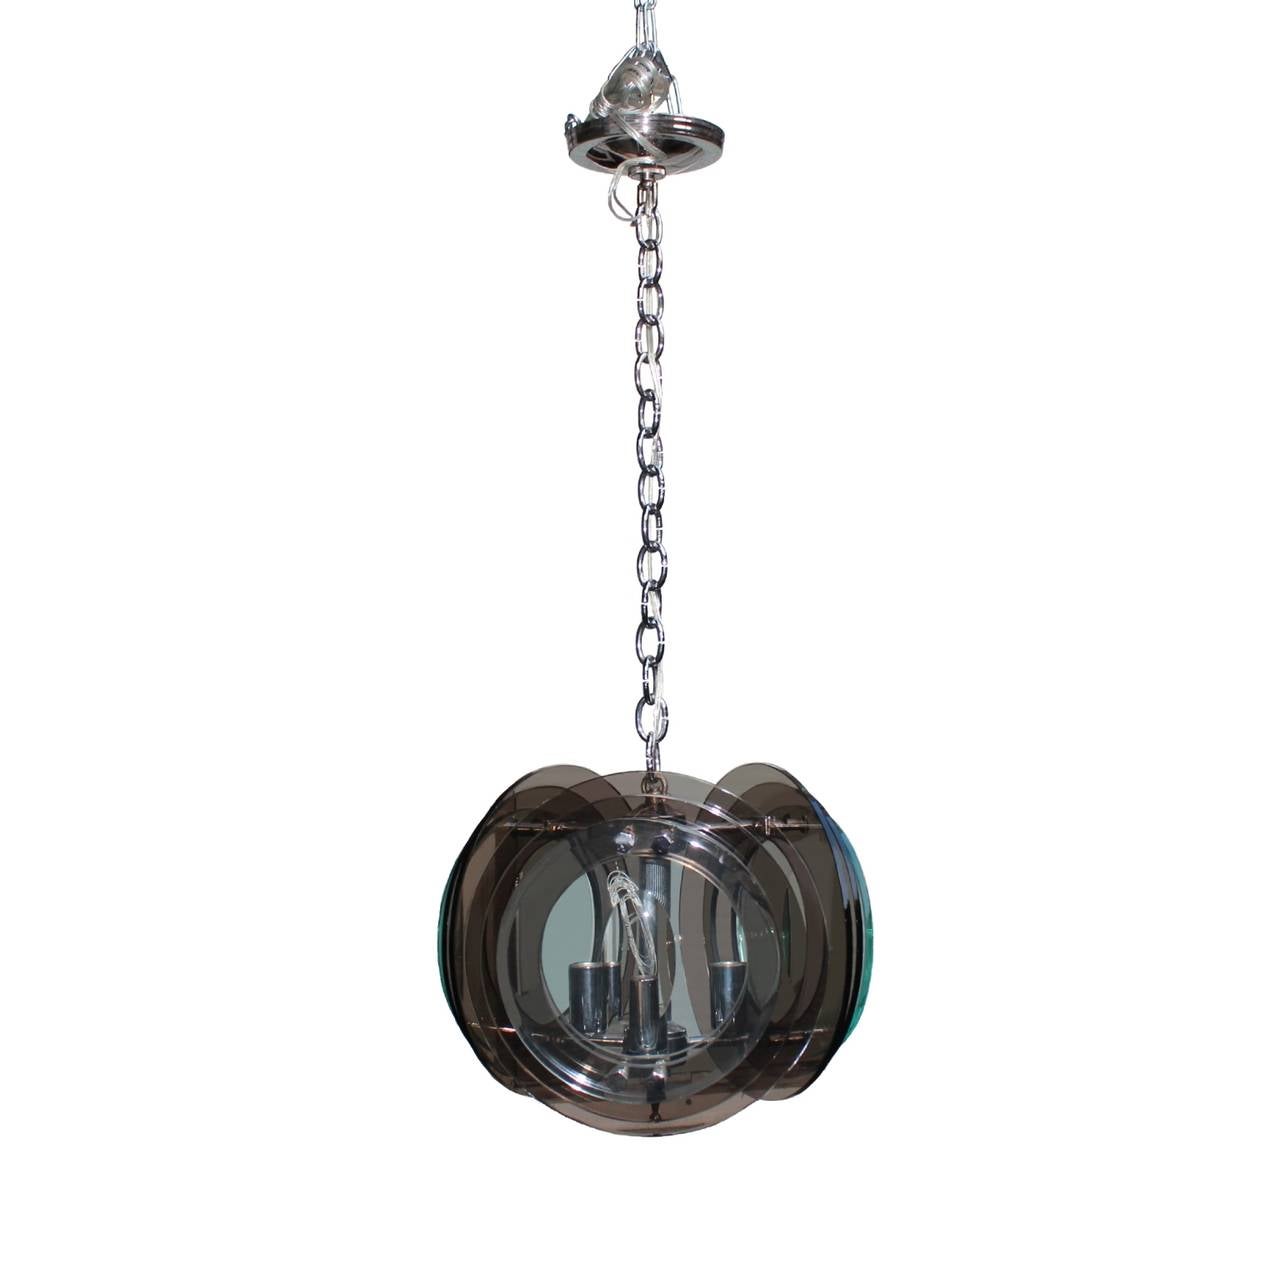 Pendant lamp of excellent quality having a central chrome baton with a drop finial supporting three sets of three glass discs corresponding in radius ascendance; smallest outer discs in light green glass with ellipsoid etchings, two larger discs in